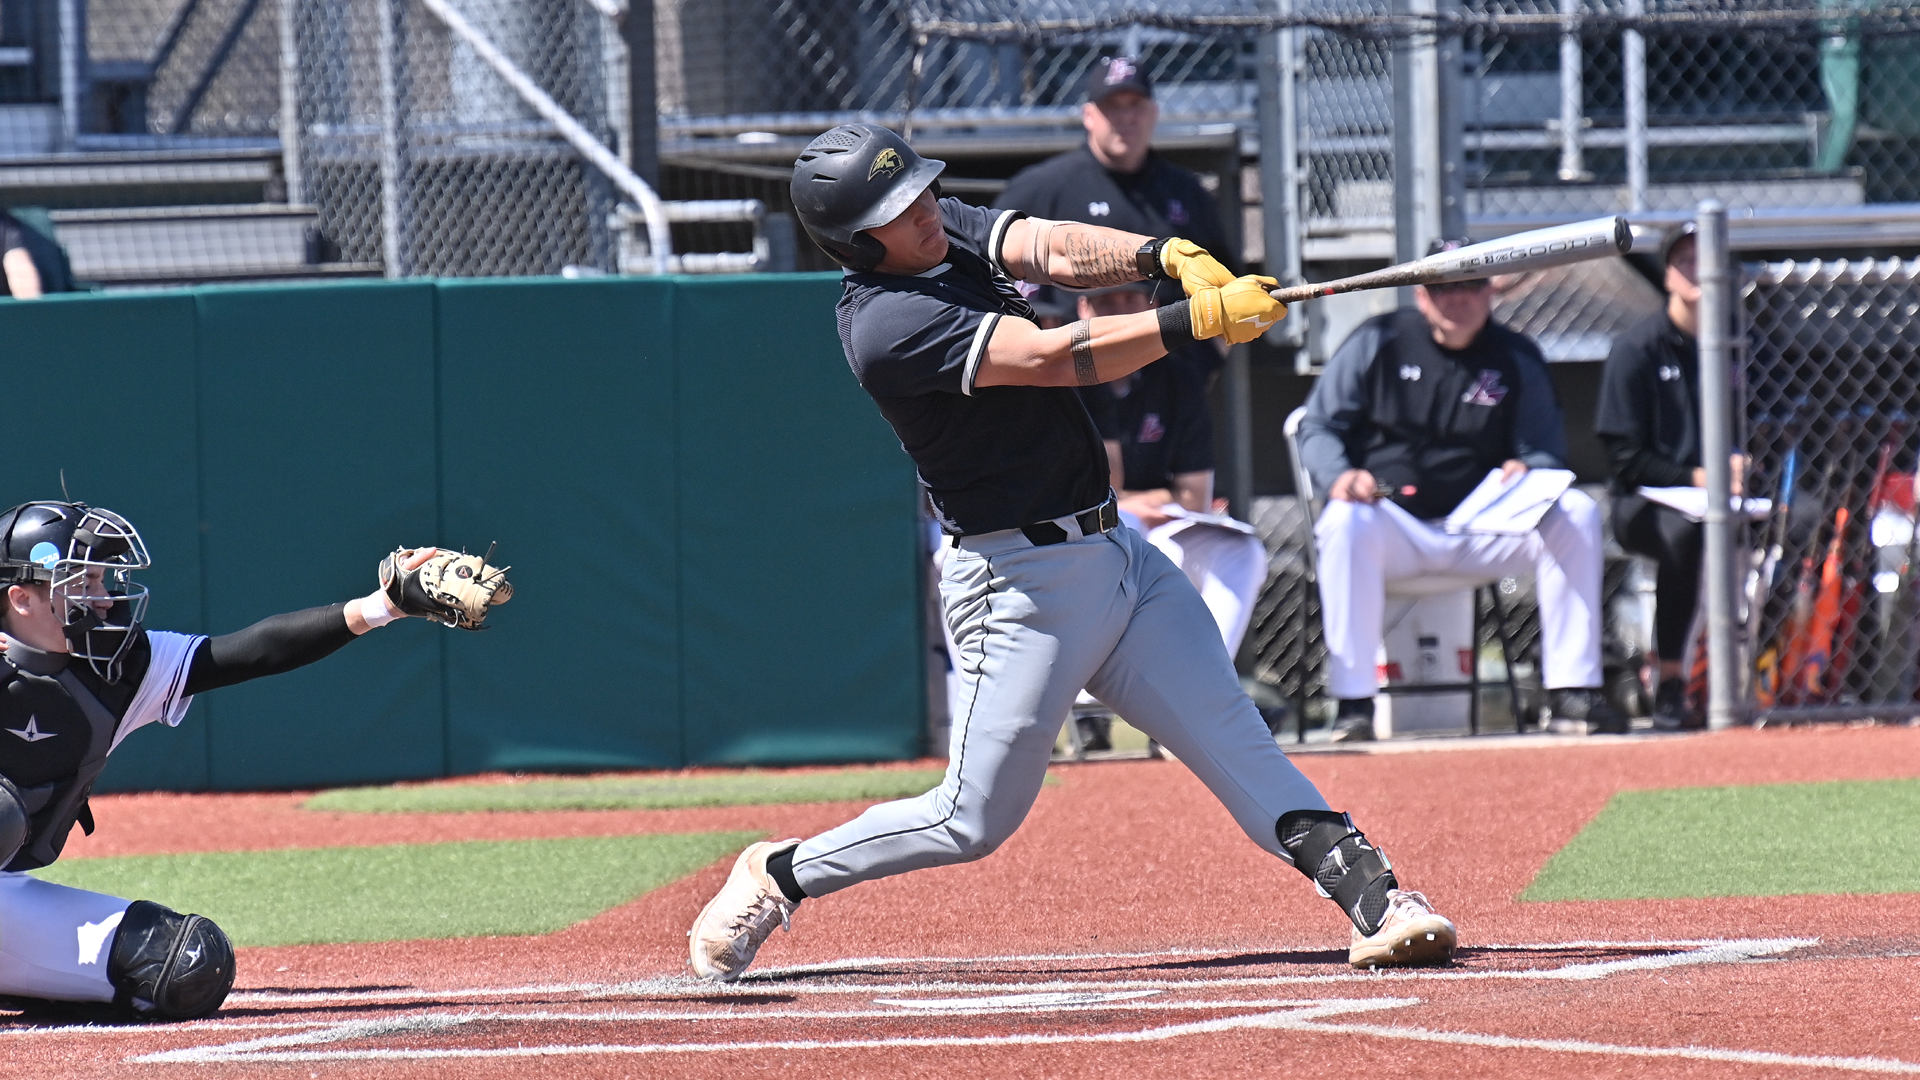 Nick Shiu went 5-for-9 with 2 RBIs and 2 doubles against the Eagles on Saturday. Photo Credit: Jim Lund, UW-La Crosse Sports Information